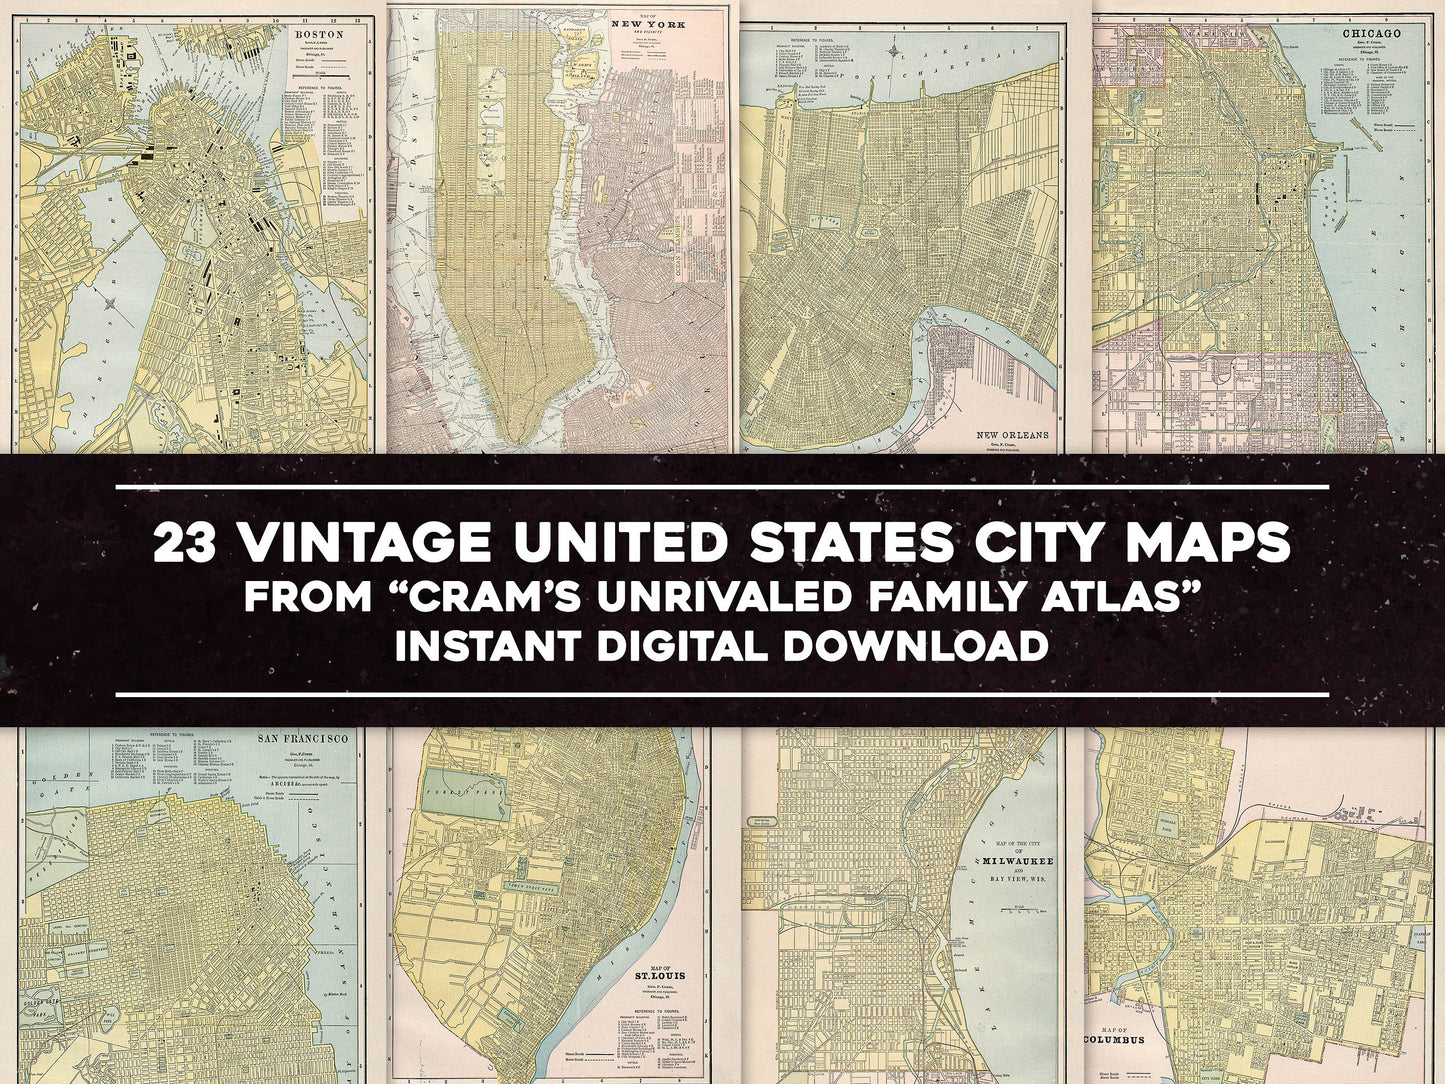 Cram's Unrivaled Family Atlas of the World Major US Cities [23 Images]